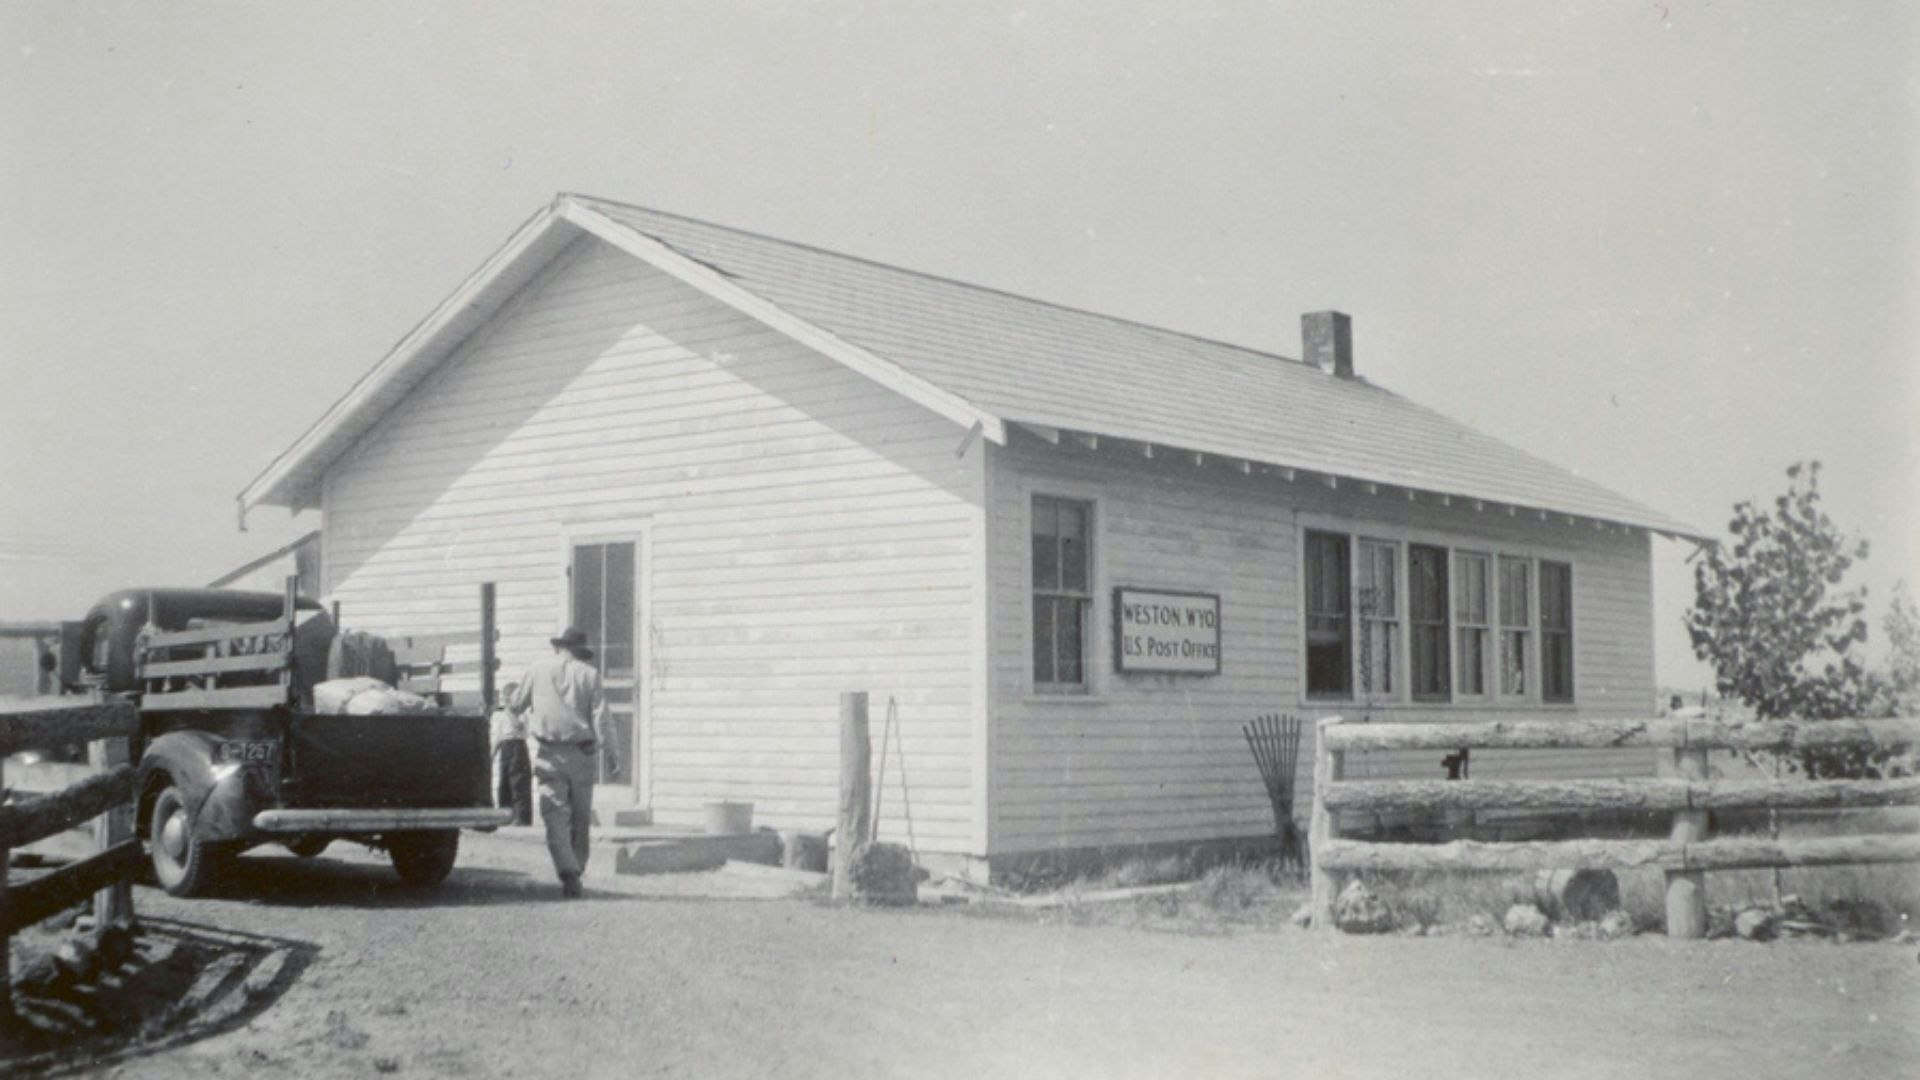 Vera Brown and her husband, Don, operated the Weston Store, which became an important lifeline and social hub for families in northeast Wyoming.